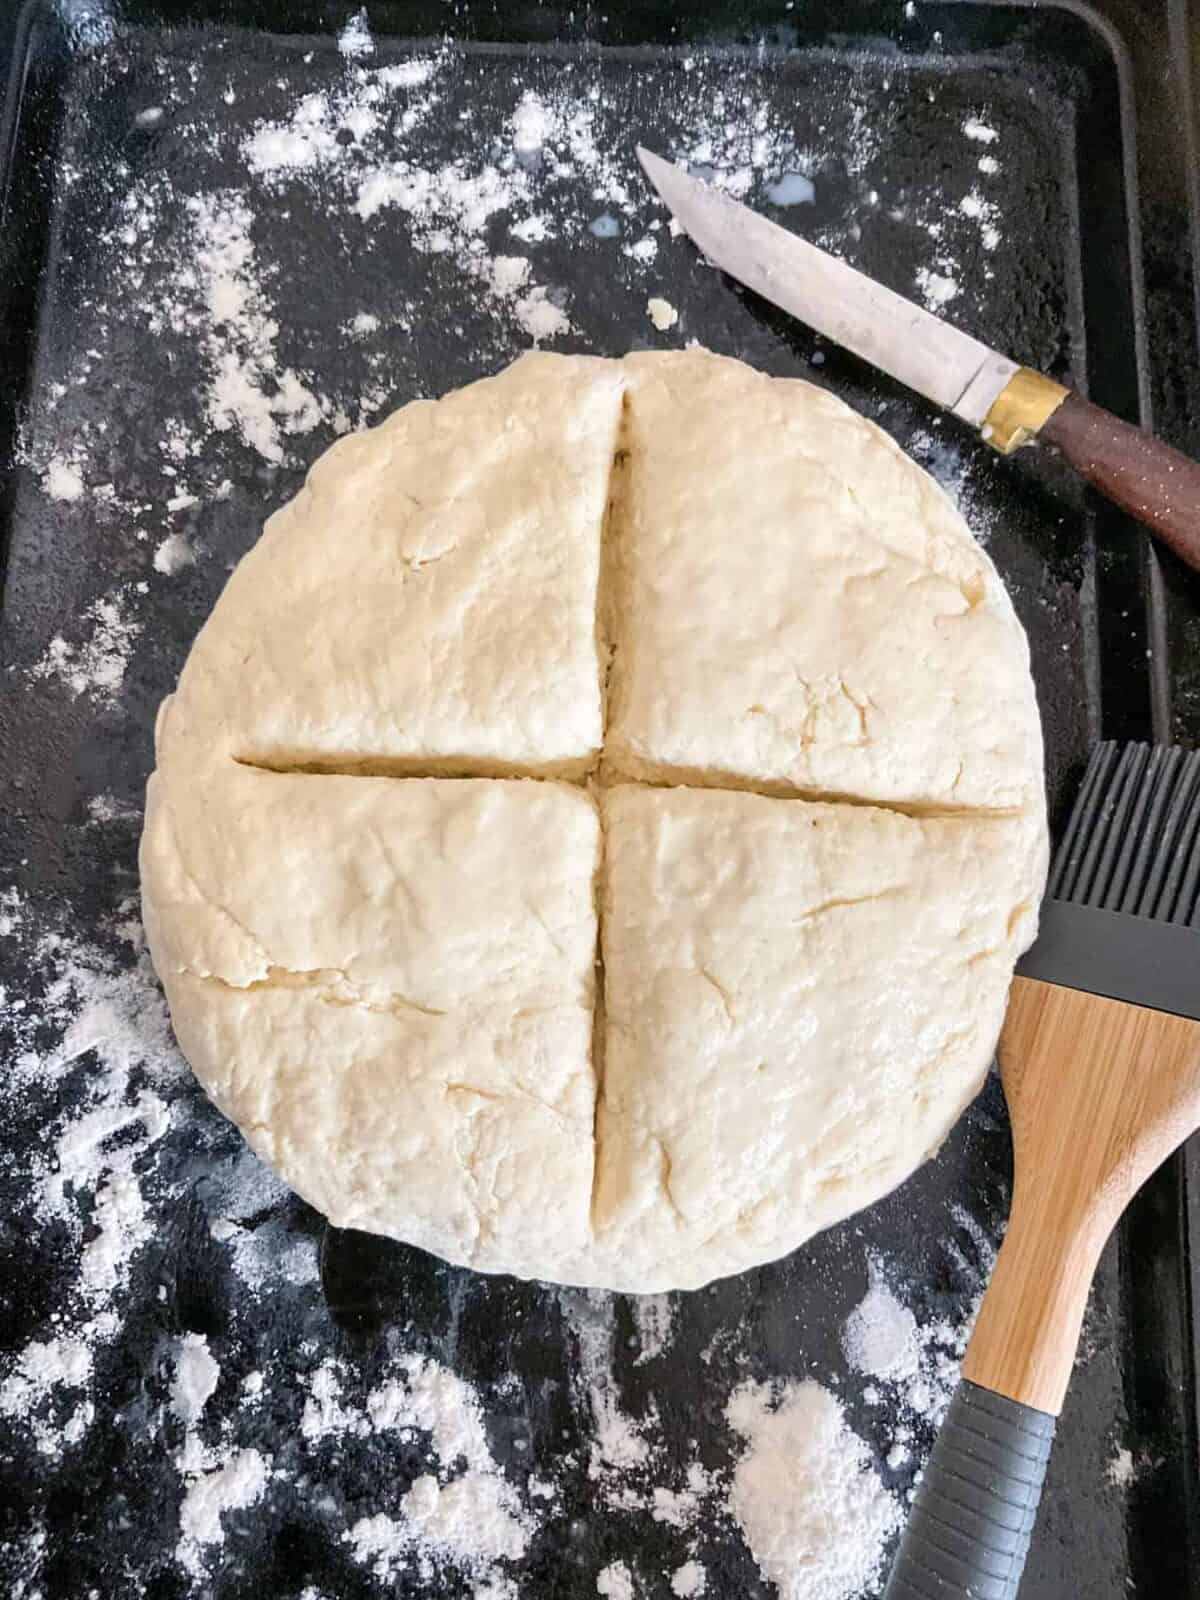 Bread with a deep cross scored through, knife to side and pastry brush to side.